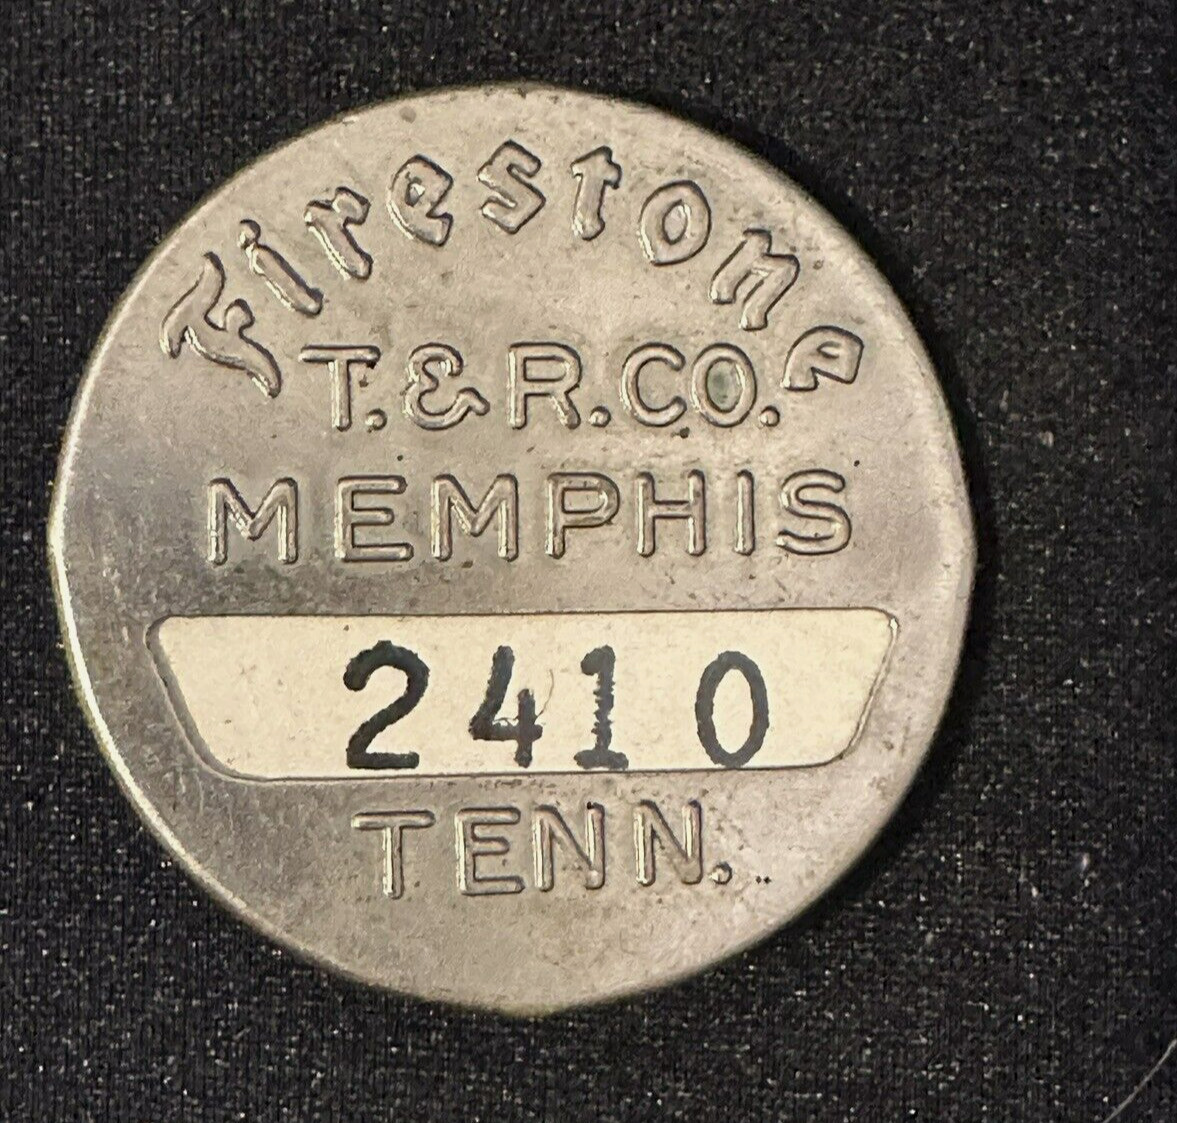 Firestone Tire & Rubber Co.  MEMPHIS TENNESSEE Employee Badge FACTORY